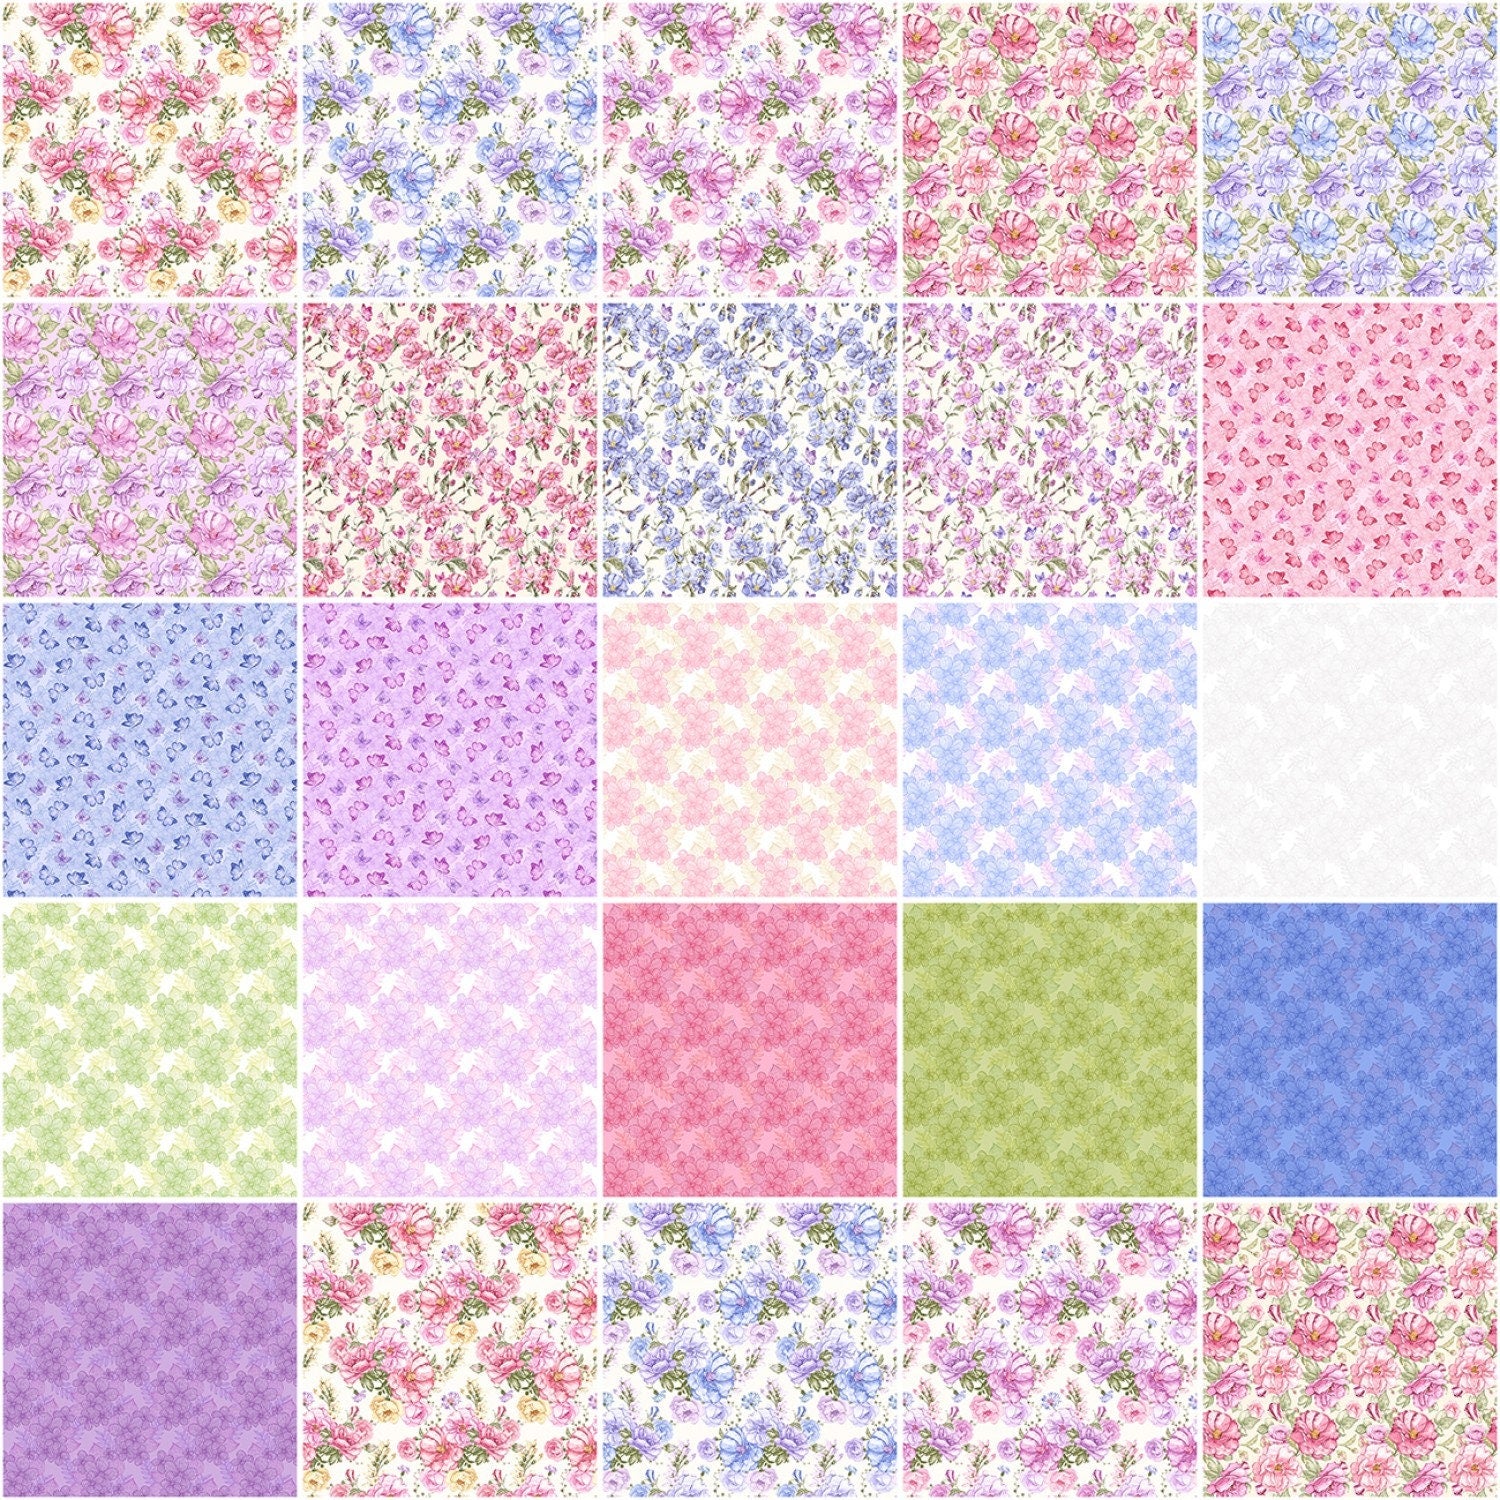 Judy's Bloom - Floral Fabric Squares, Charm Pack, Eleanor Burns, Pink, Purple, Blue, Green, Benartex, 5 inch squares